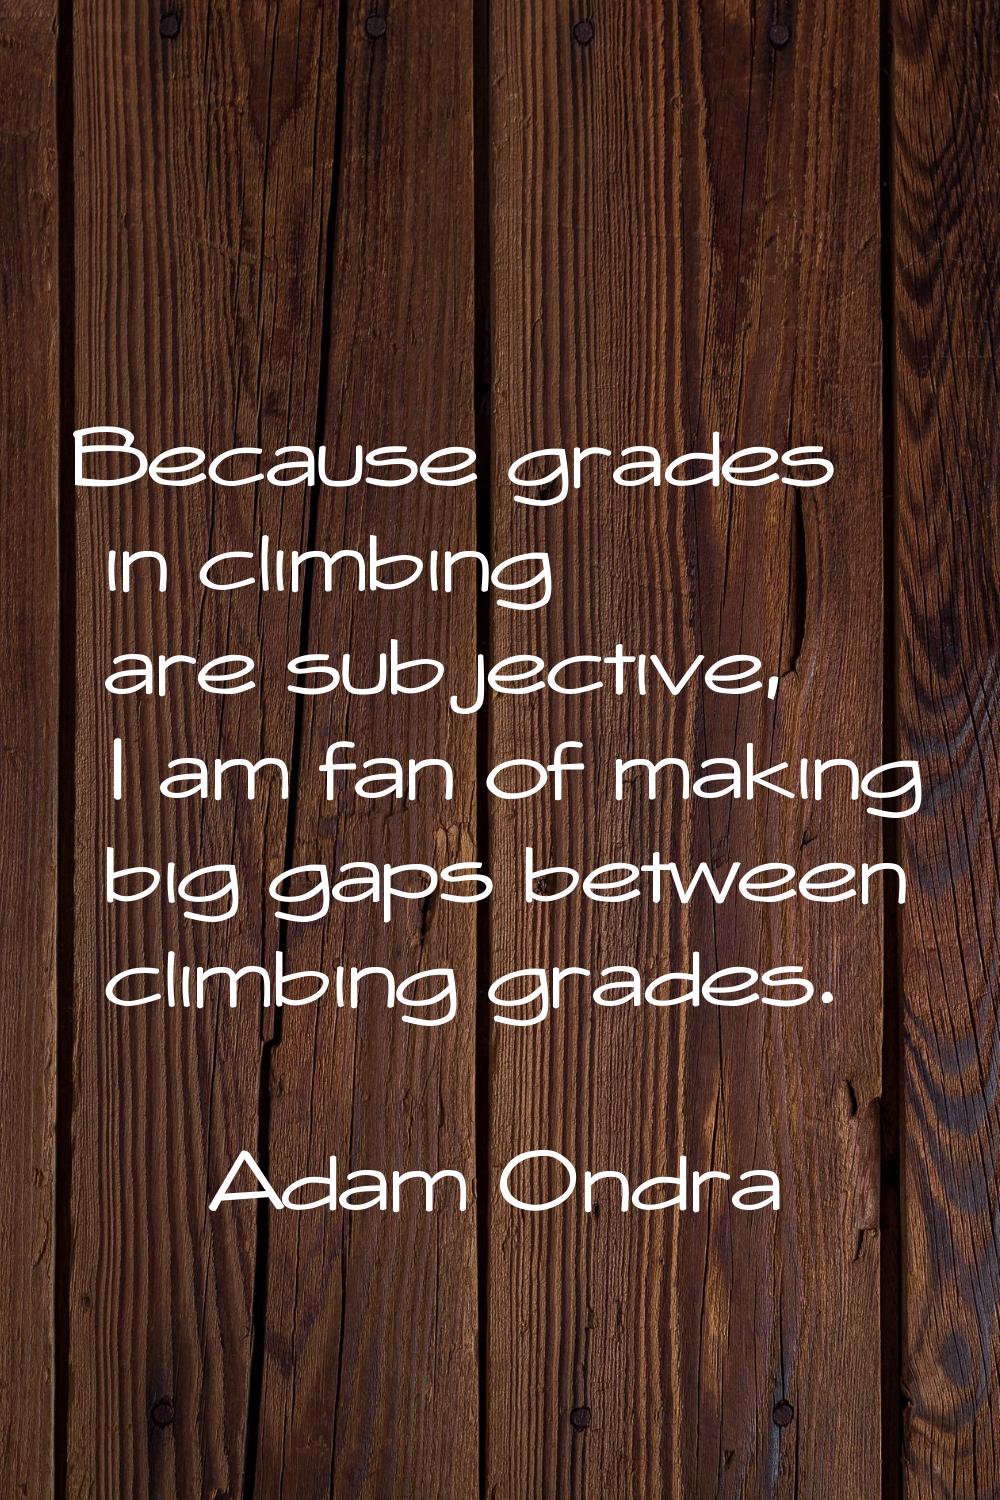 Because grades in climbing are subjective, I am fan of making big gaps between climbing grades.